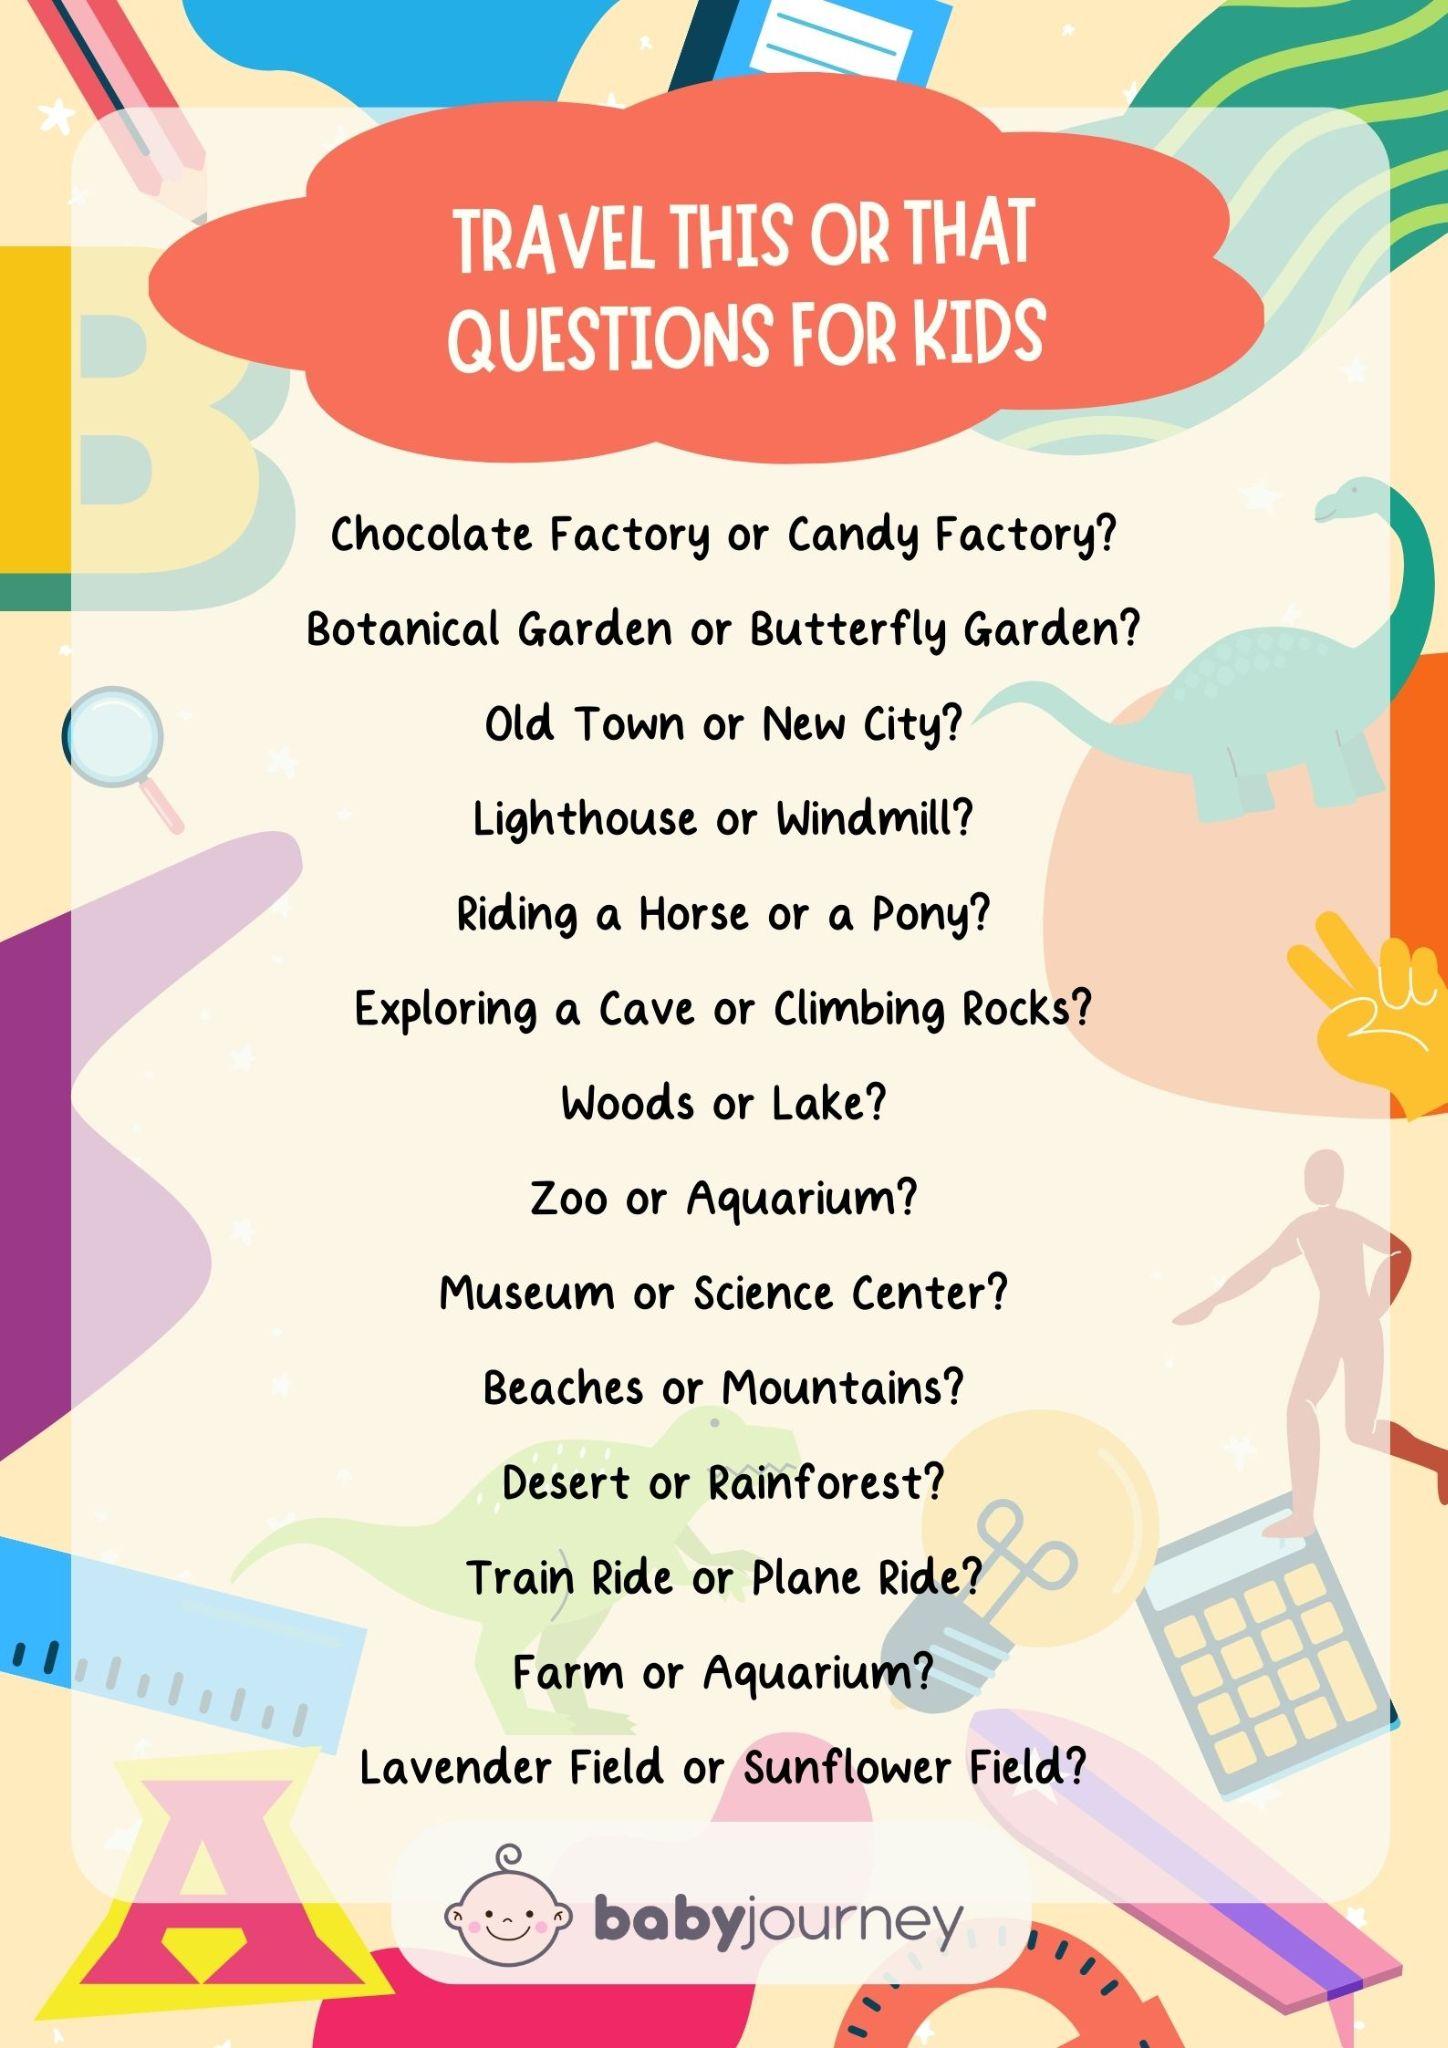 Travel This or That Topics - Fun This or That Questions for Kids Ideas - Baby Journey Best Parenting Blogs